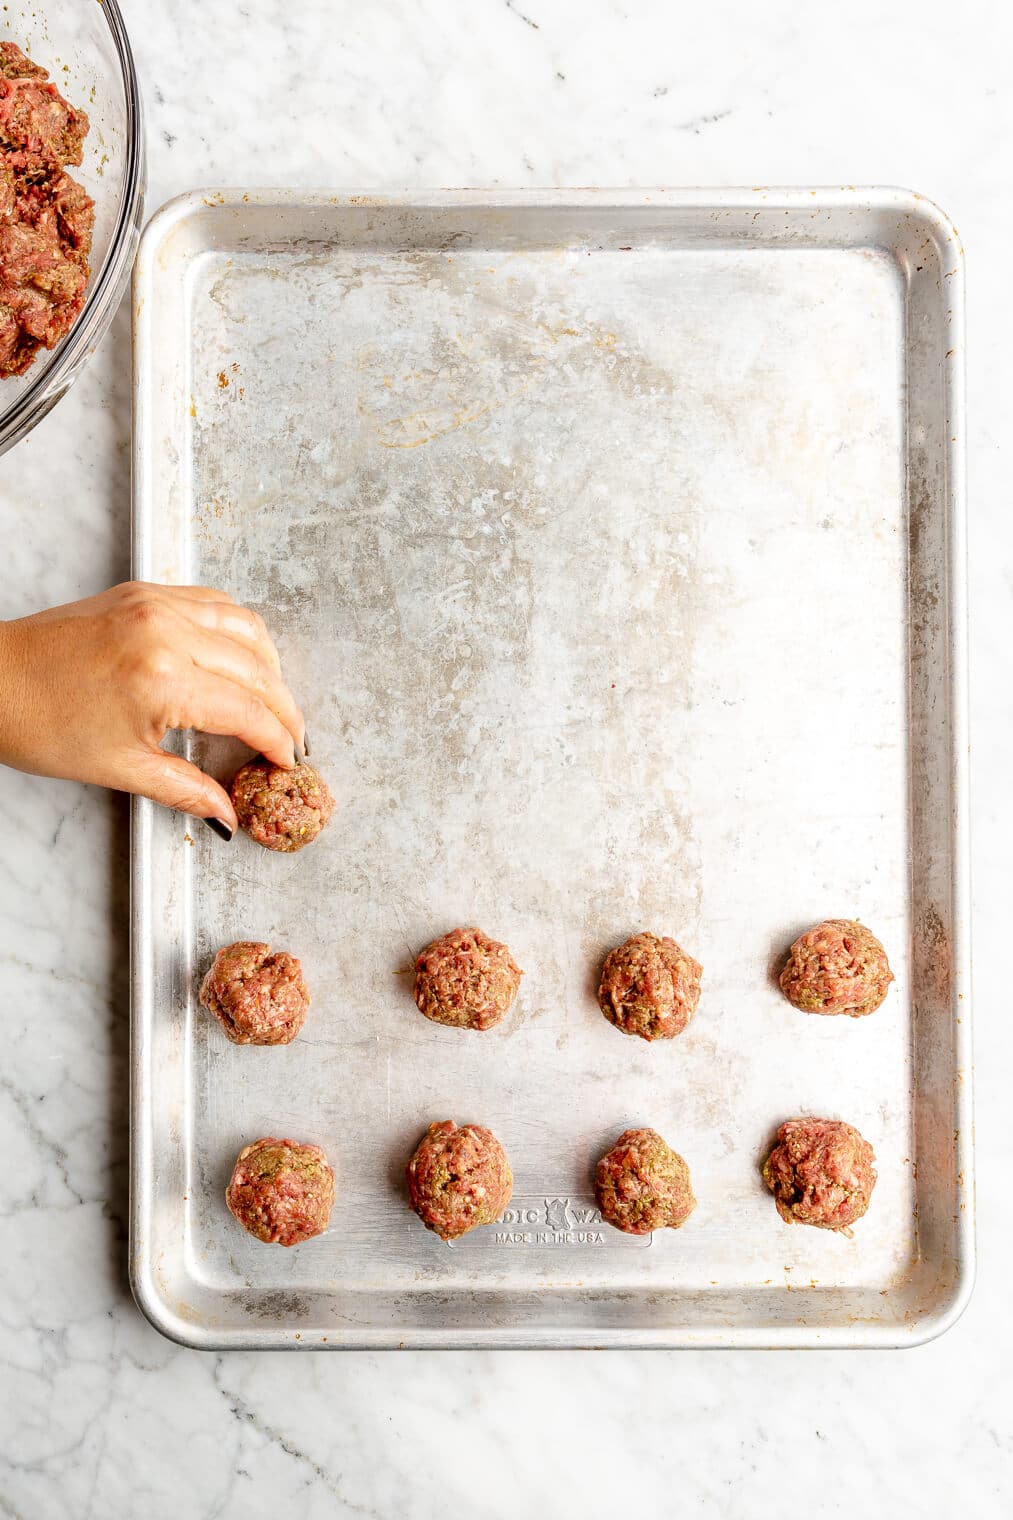 Hand placing meatballs in rows of 4 on a baking sheet.